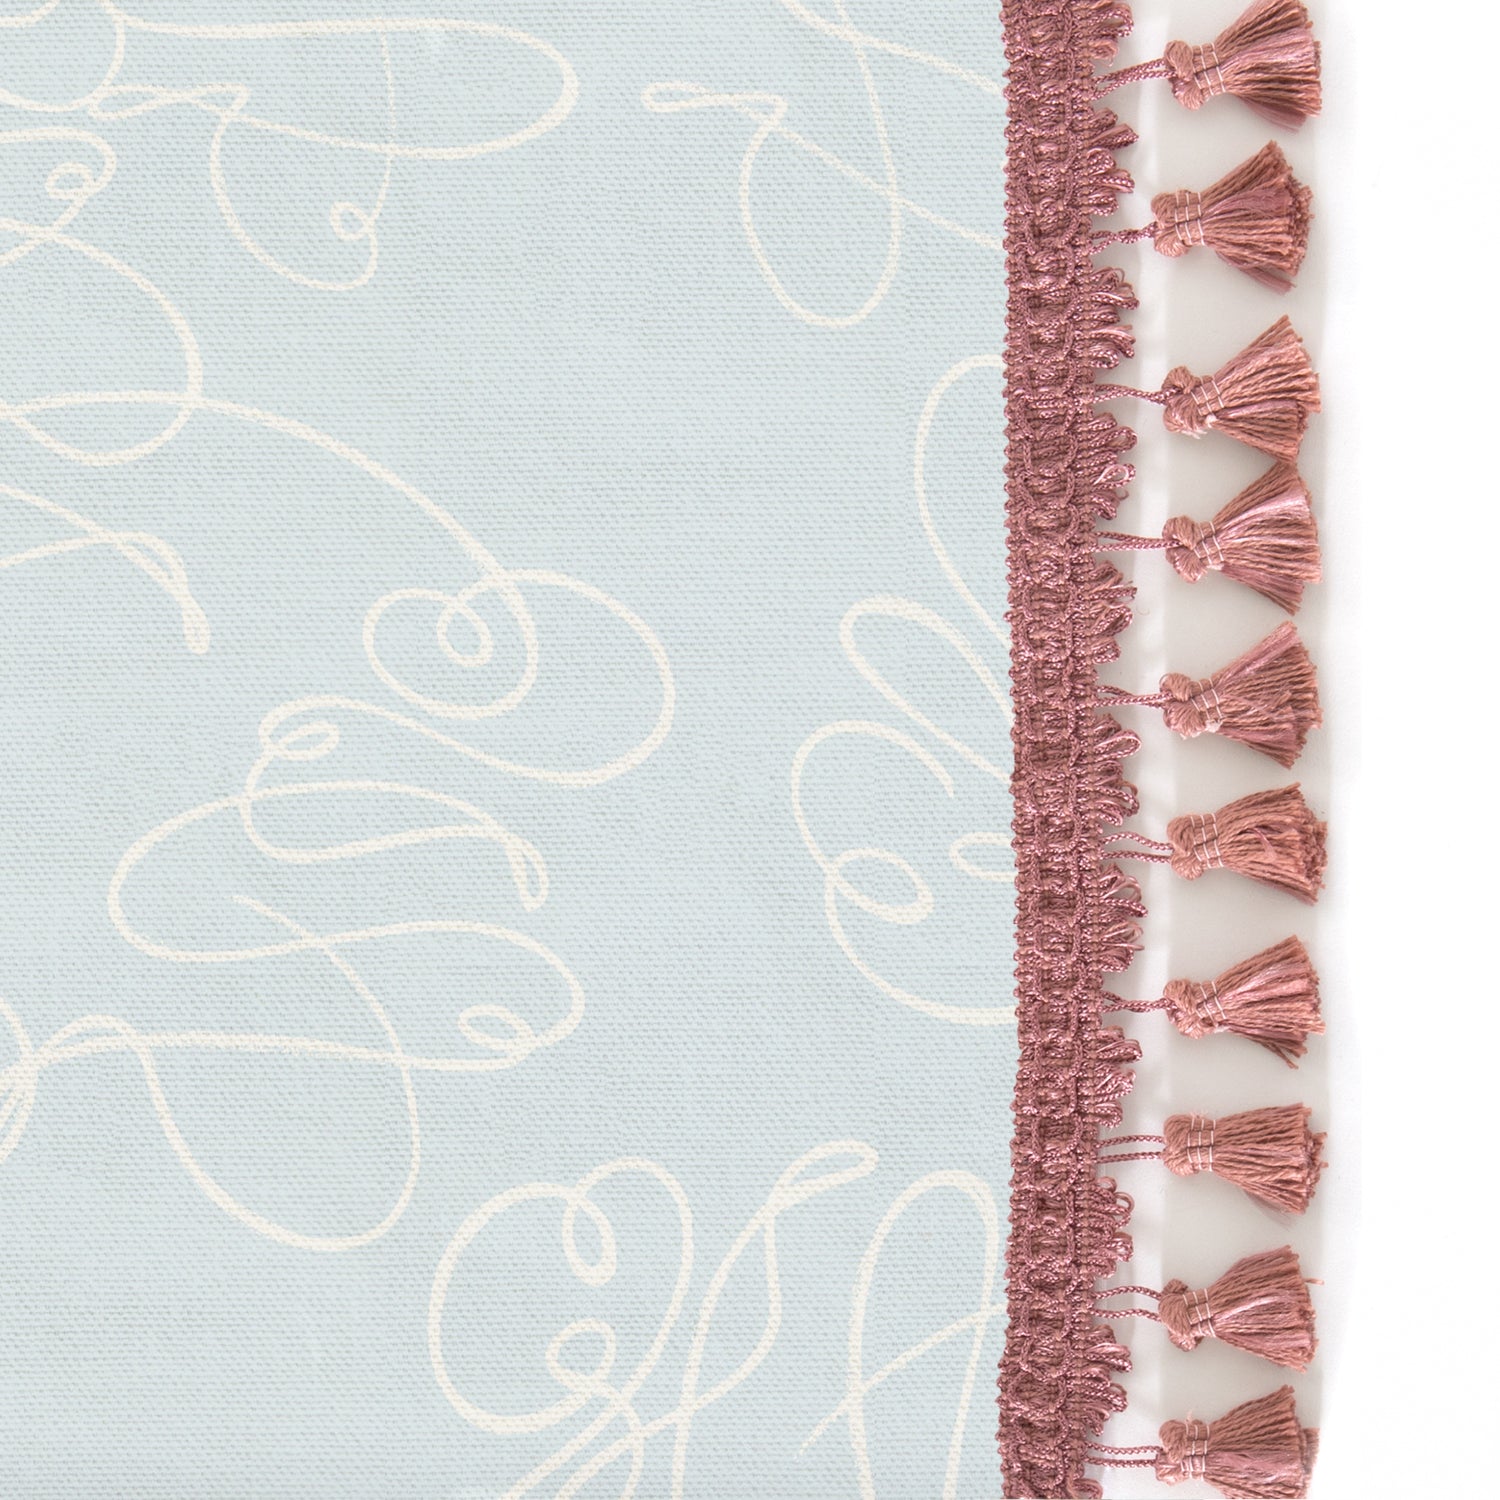 Upclose picture of Mirabella custom Powder Blue Abstractshower curtain with dusty rose tassel trim